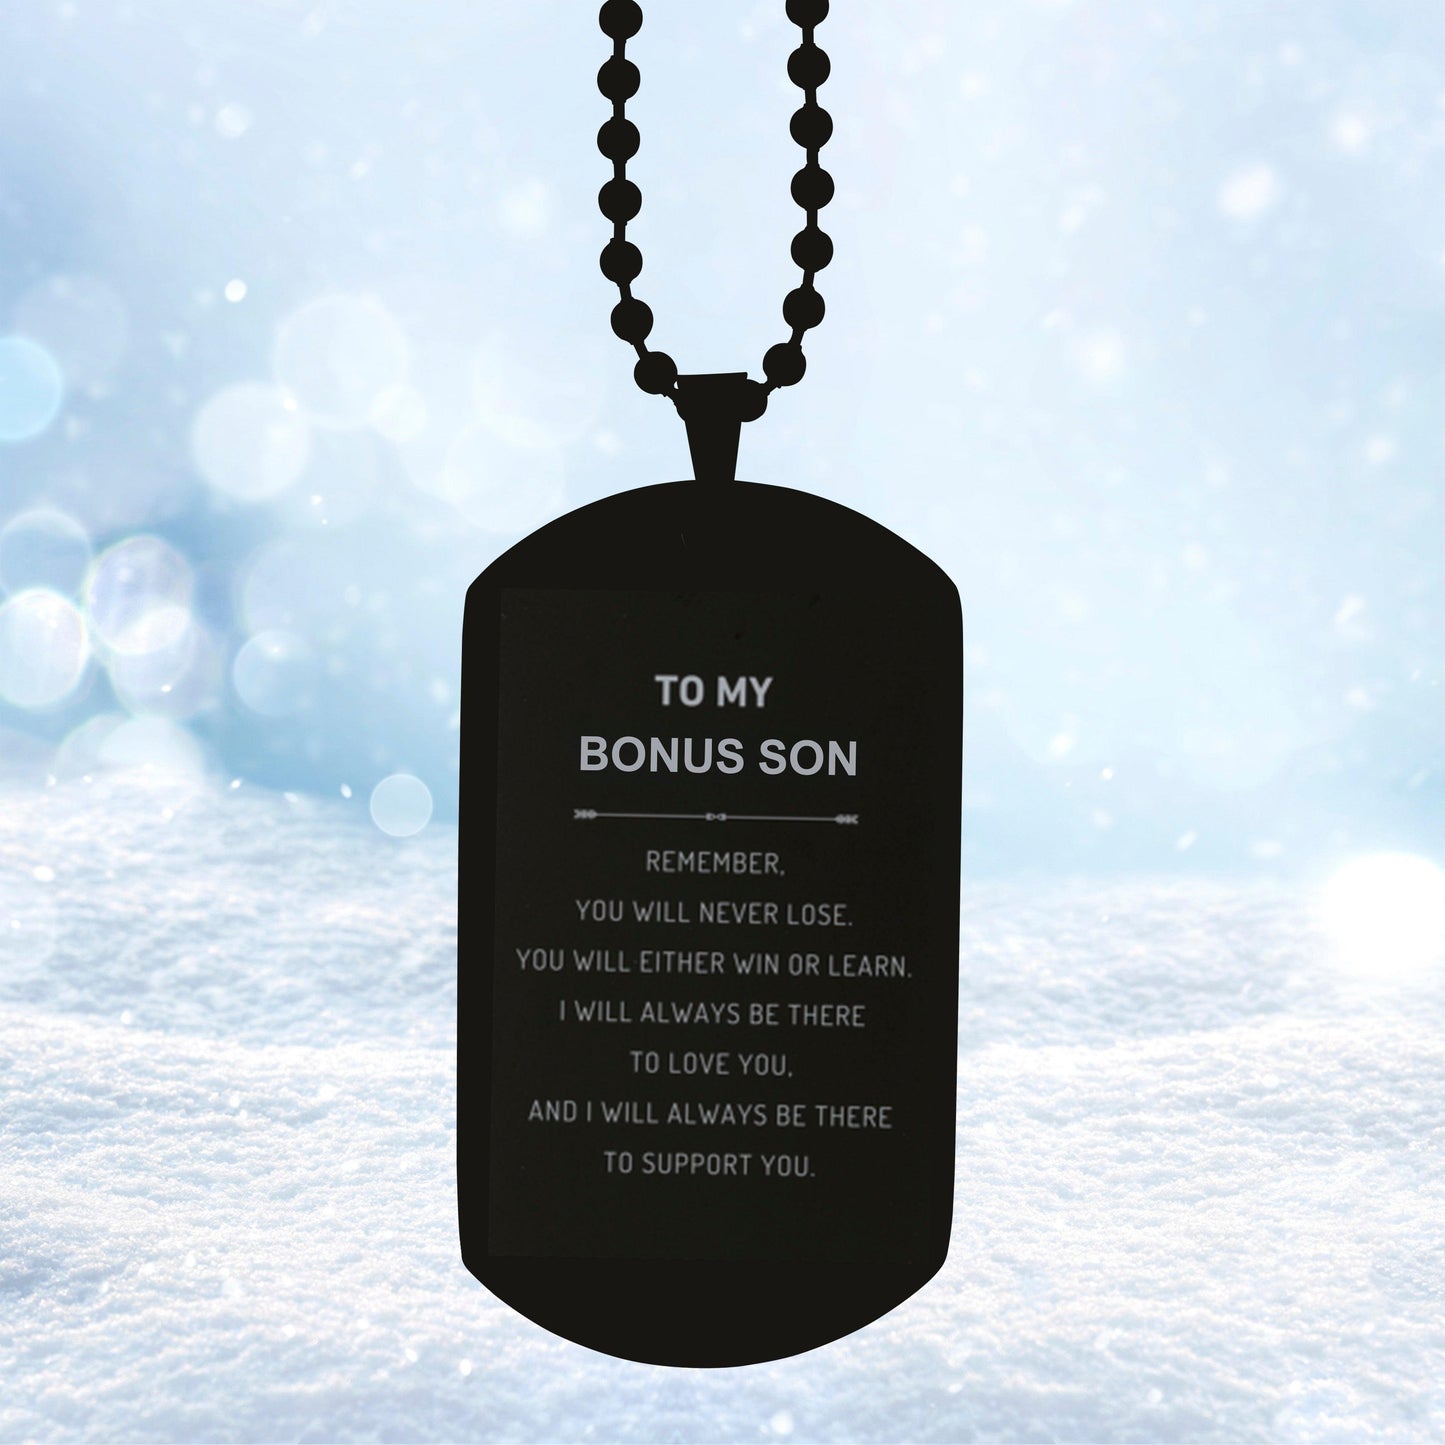 Bonus Son Gifts, To My Bonus Son Remember, you will never lose. You will either WIN or LEARN, Keepsake Black Dog Tag For Bonus Son Engraved, Birthday Christmas Gifts Ideas For Bonus Son X-mas Gifts